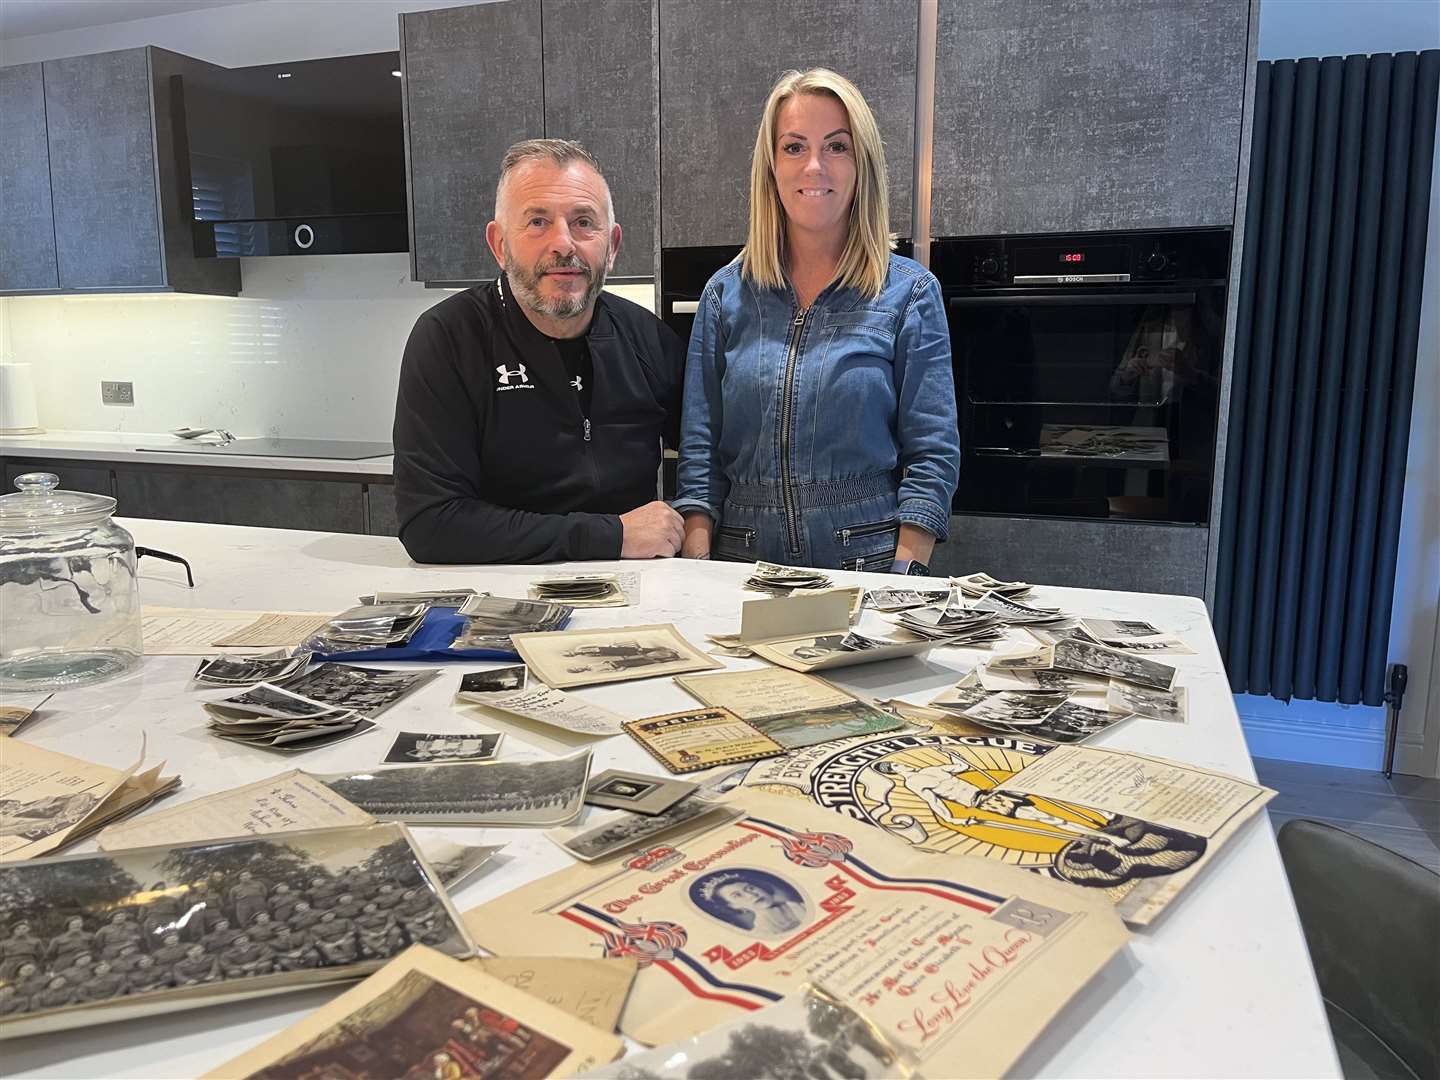 Darren and Natalie Songhurst were amazed to find letters and pictures hidden in their Ashford home